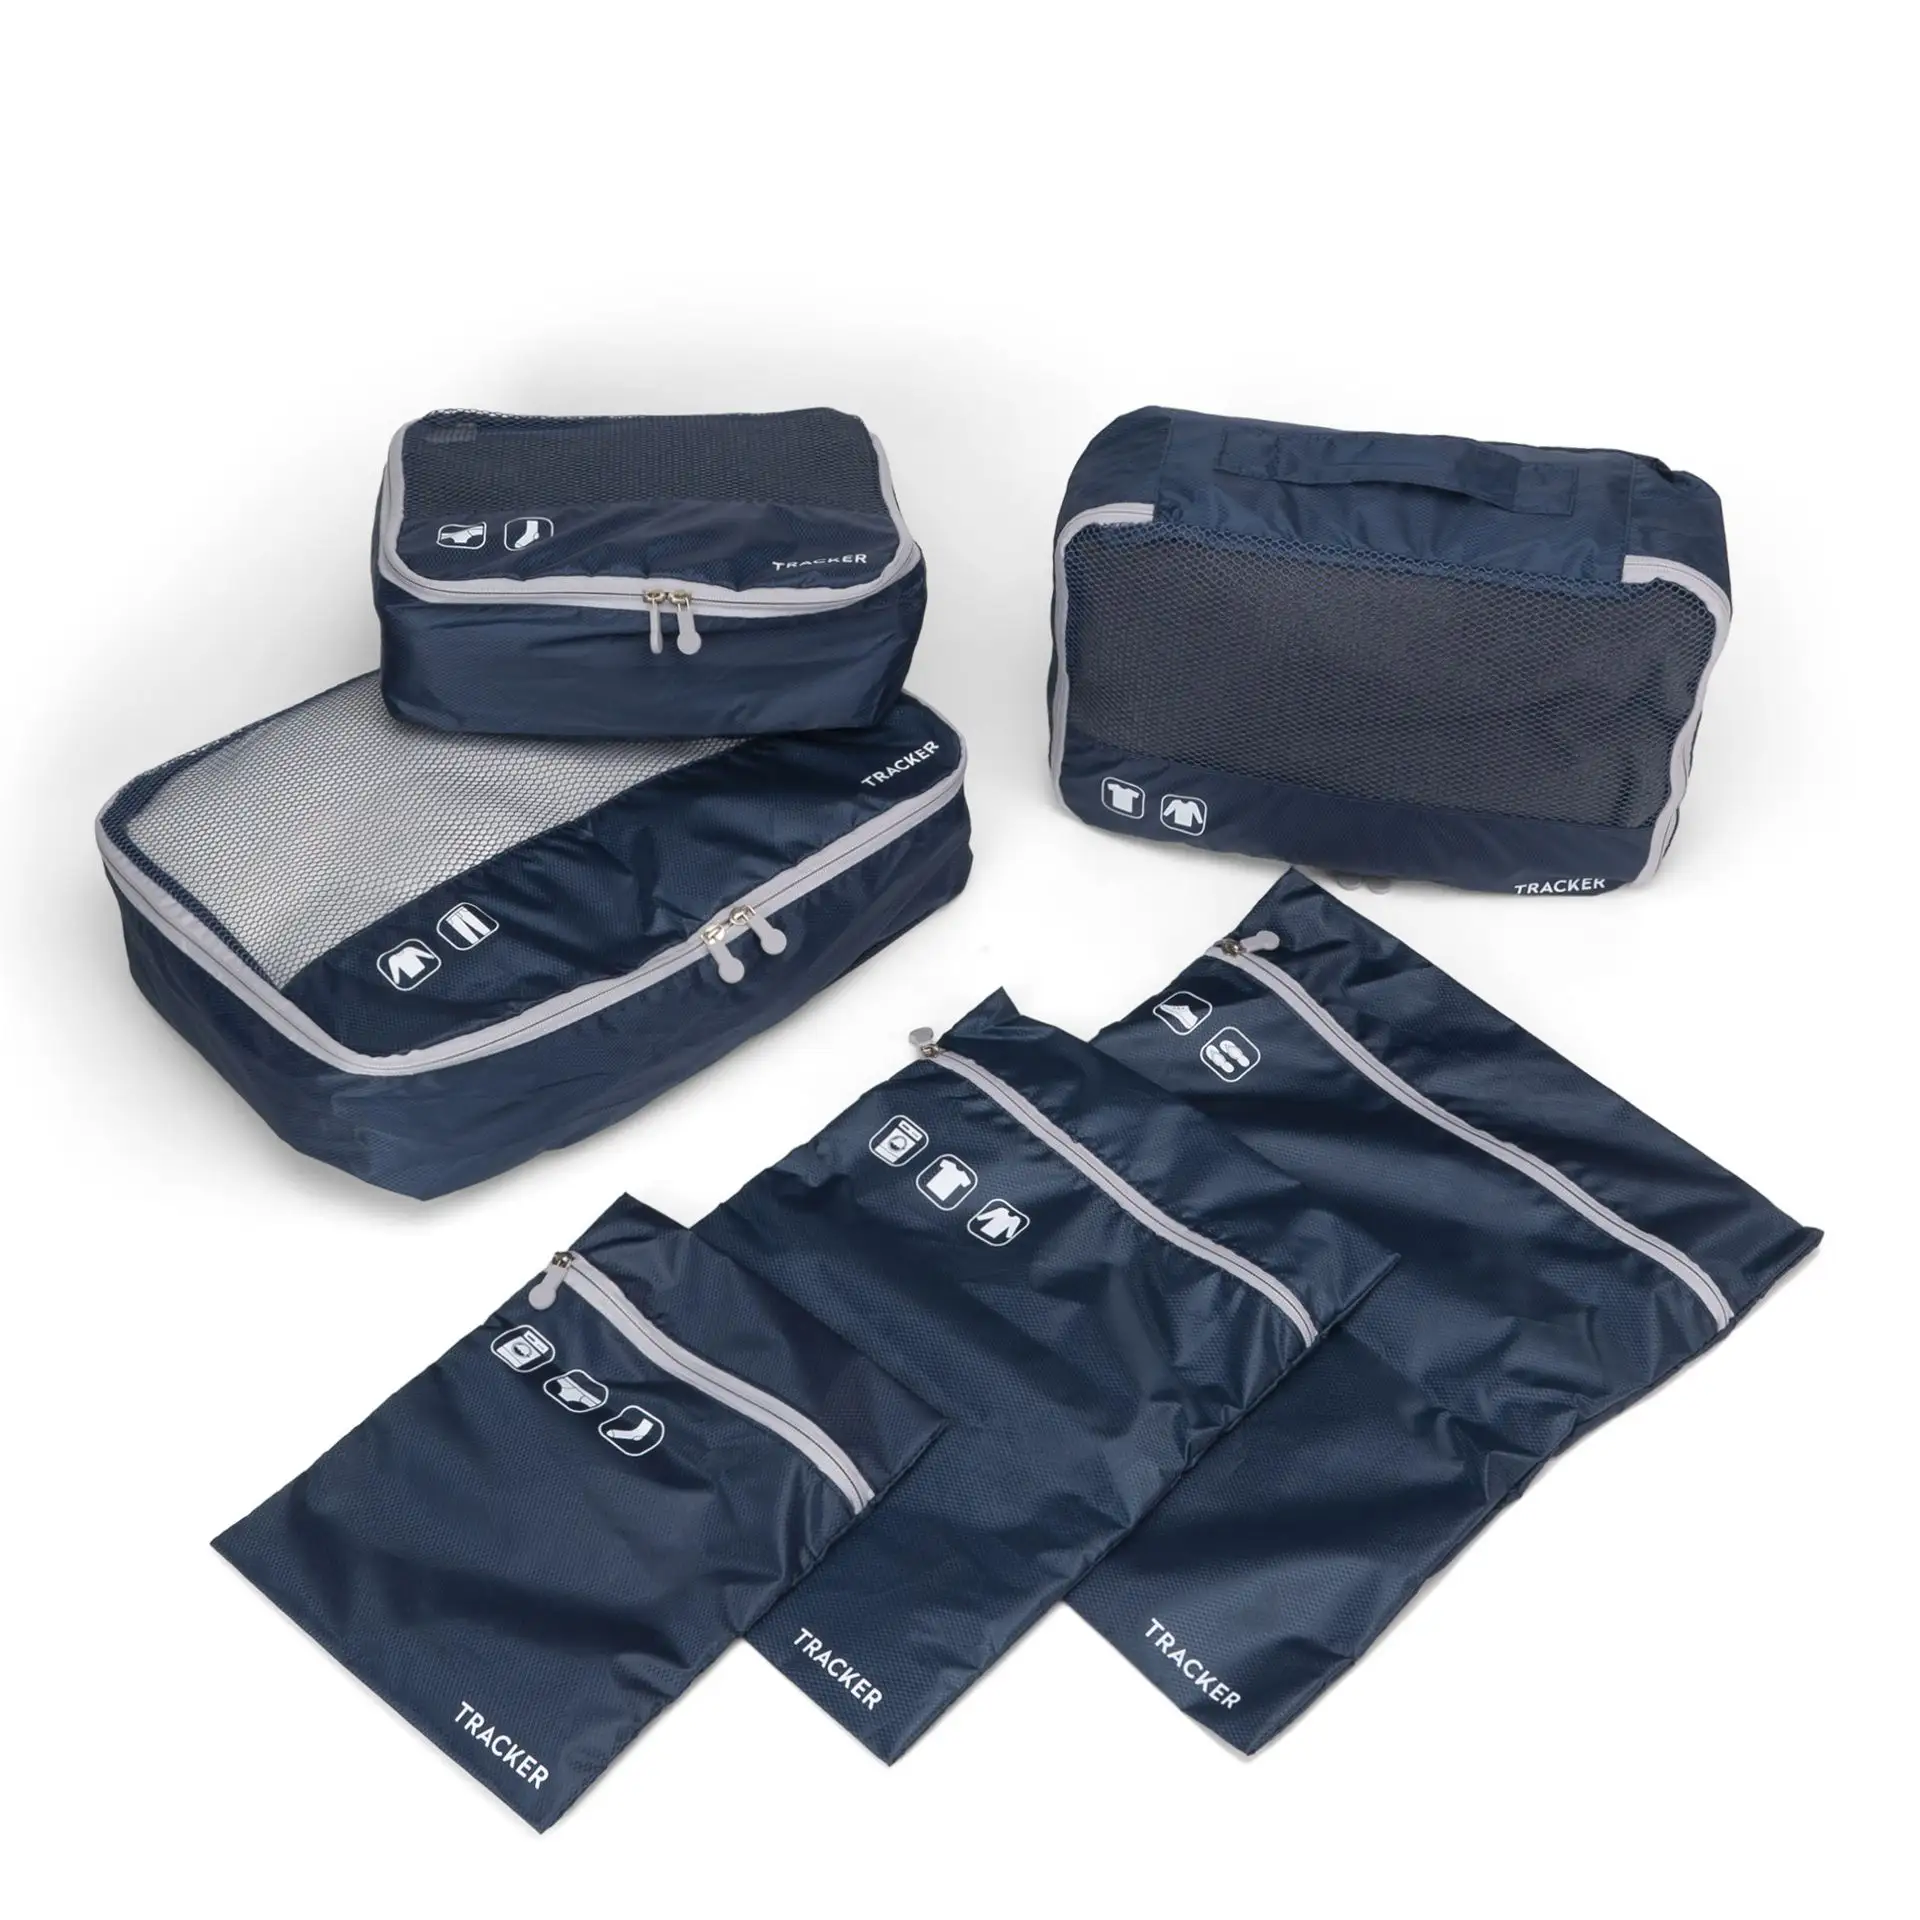 Multi-functional Travel Shirt Tie Organizer bag/luggage Clothes Packing Bag Case for Men